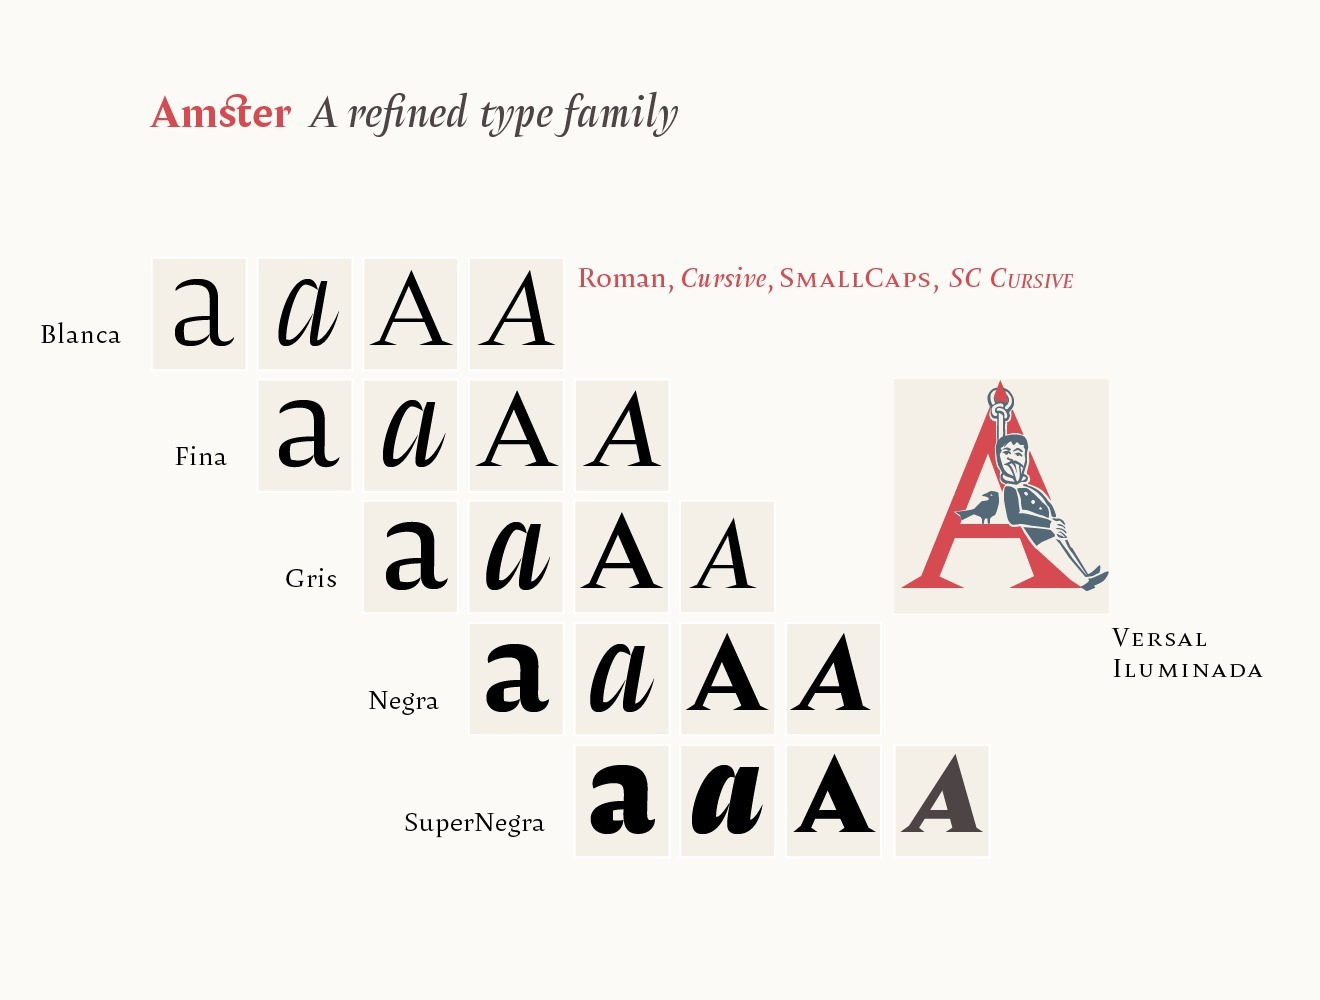 Amster is an energetic & refined type created by Francisco Gálvez, with a sharp concept on how refinement & austerity can meet harmoniously. Amster can build a text that is highly readable and friendly. It has five weights of roman & cursive both with smallcaps and fully equipped with all OT sorts, plus 2 kinds of swashes, smart ornaments, and a wonderful set of illuminated initials. Its style makes Amster very versatile, allowing for a wide range of uses: screen to print, small text to display, science to poetry. Read more at PampaType.com.